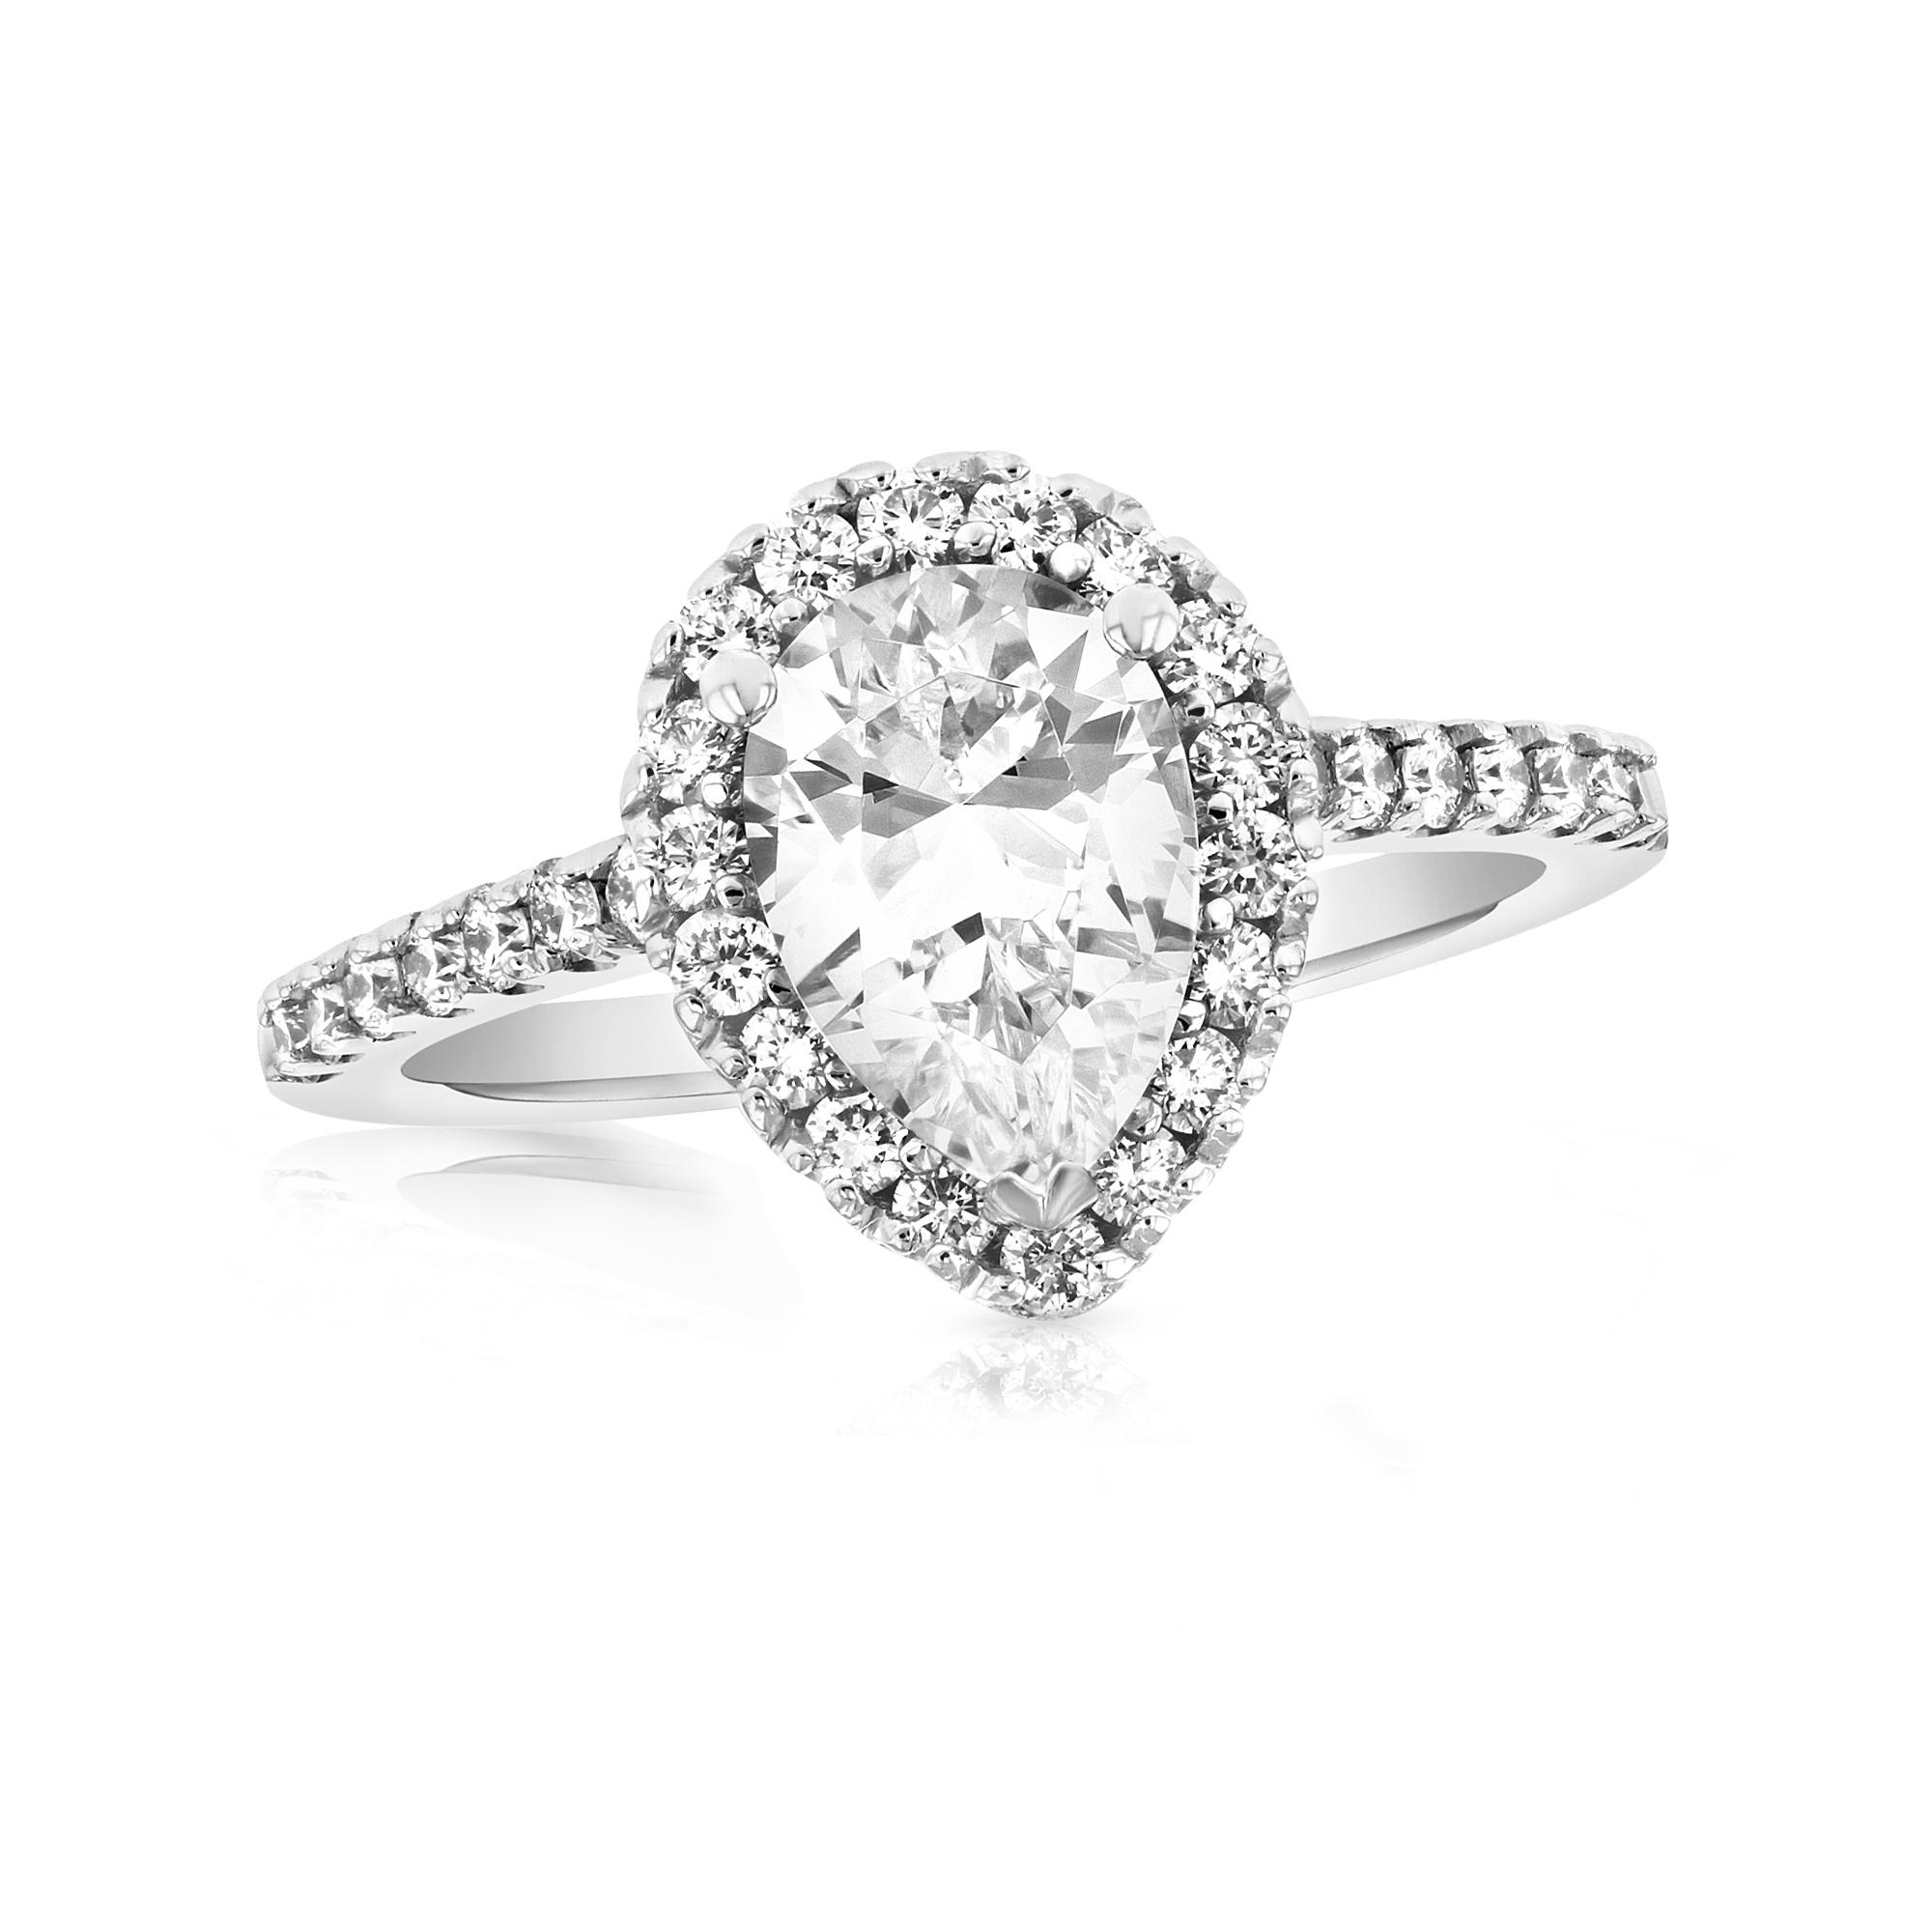 View 0.38ctw Diamond Pear Shaped Halo Semi Mount Ring in 14k White Gold